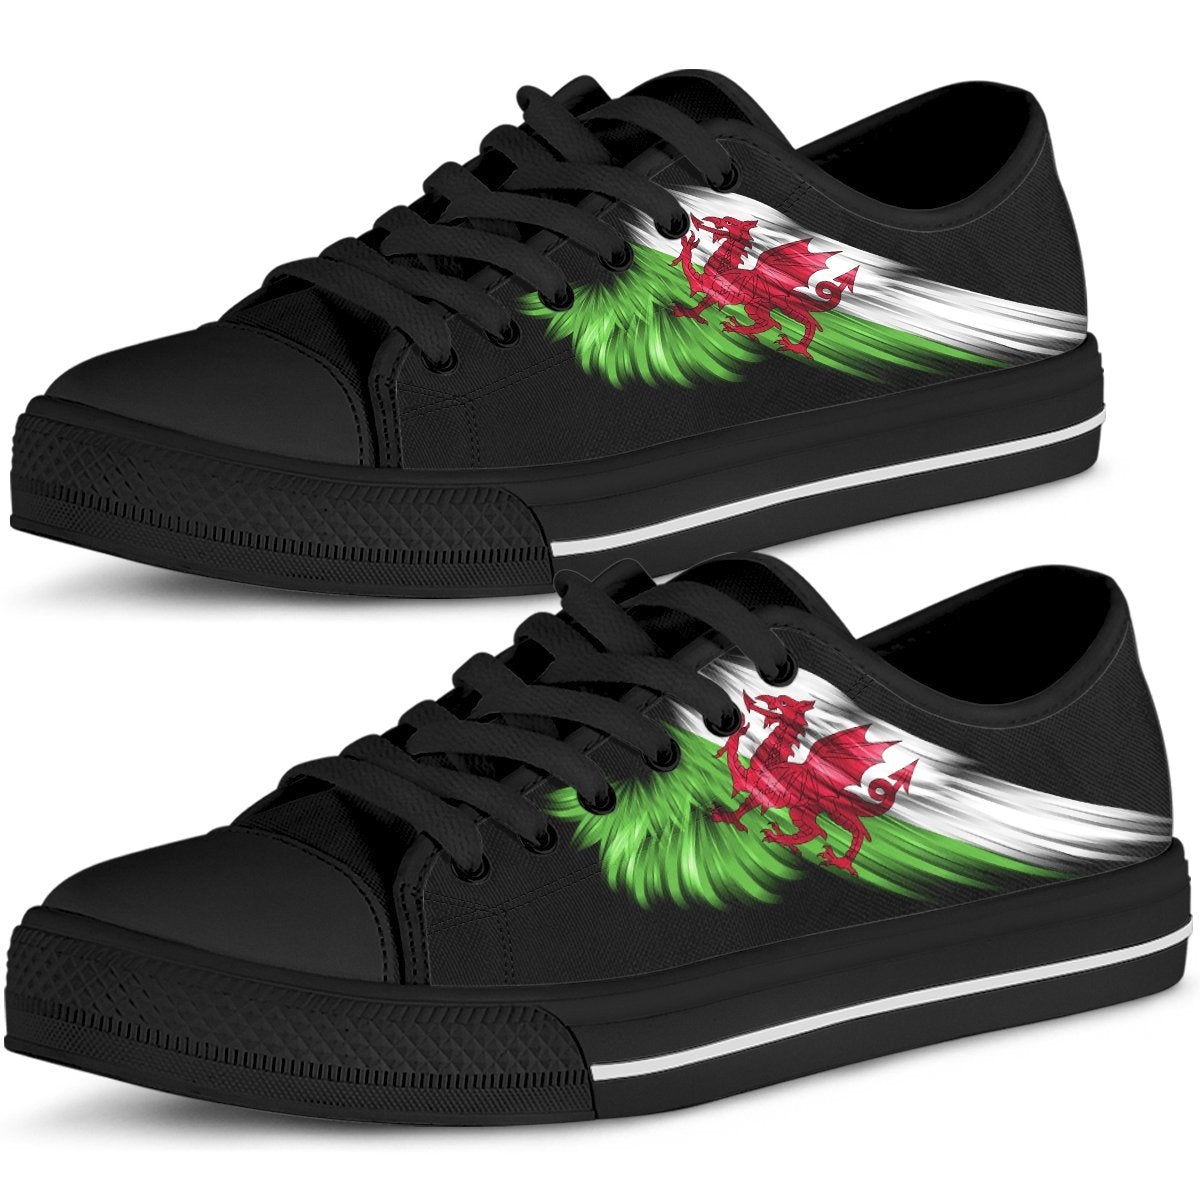 wales-wing-low-top-shoes-women